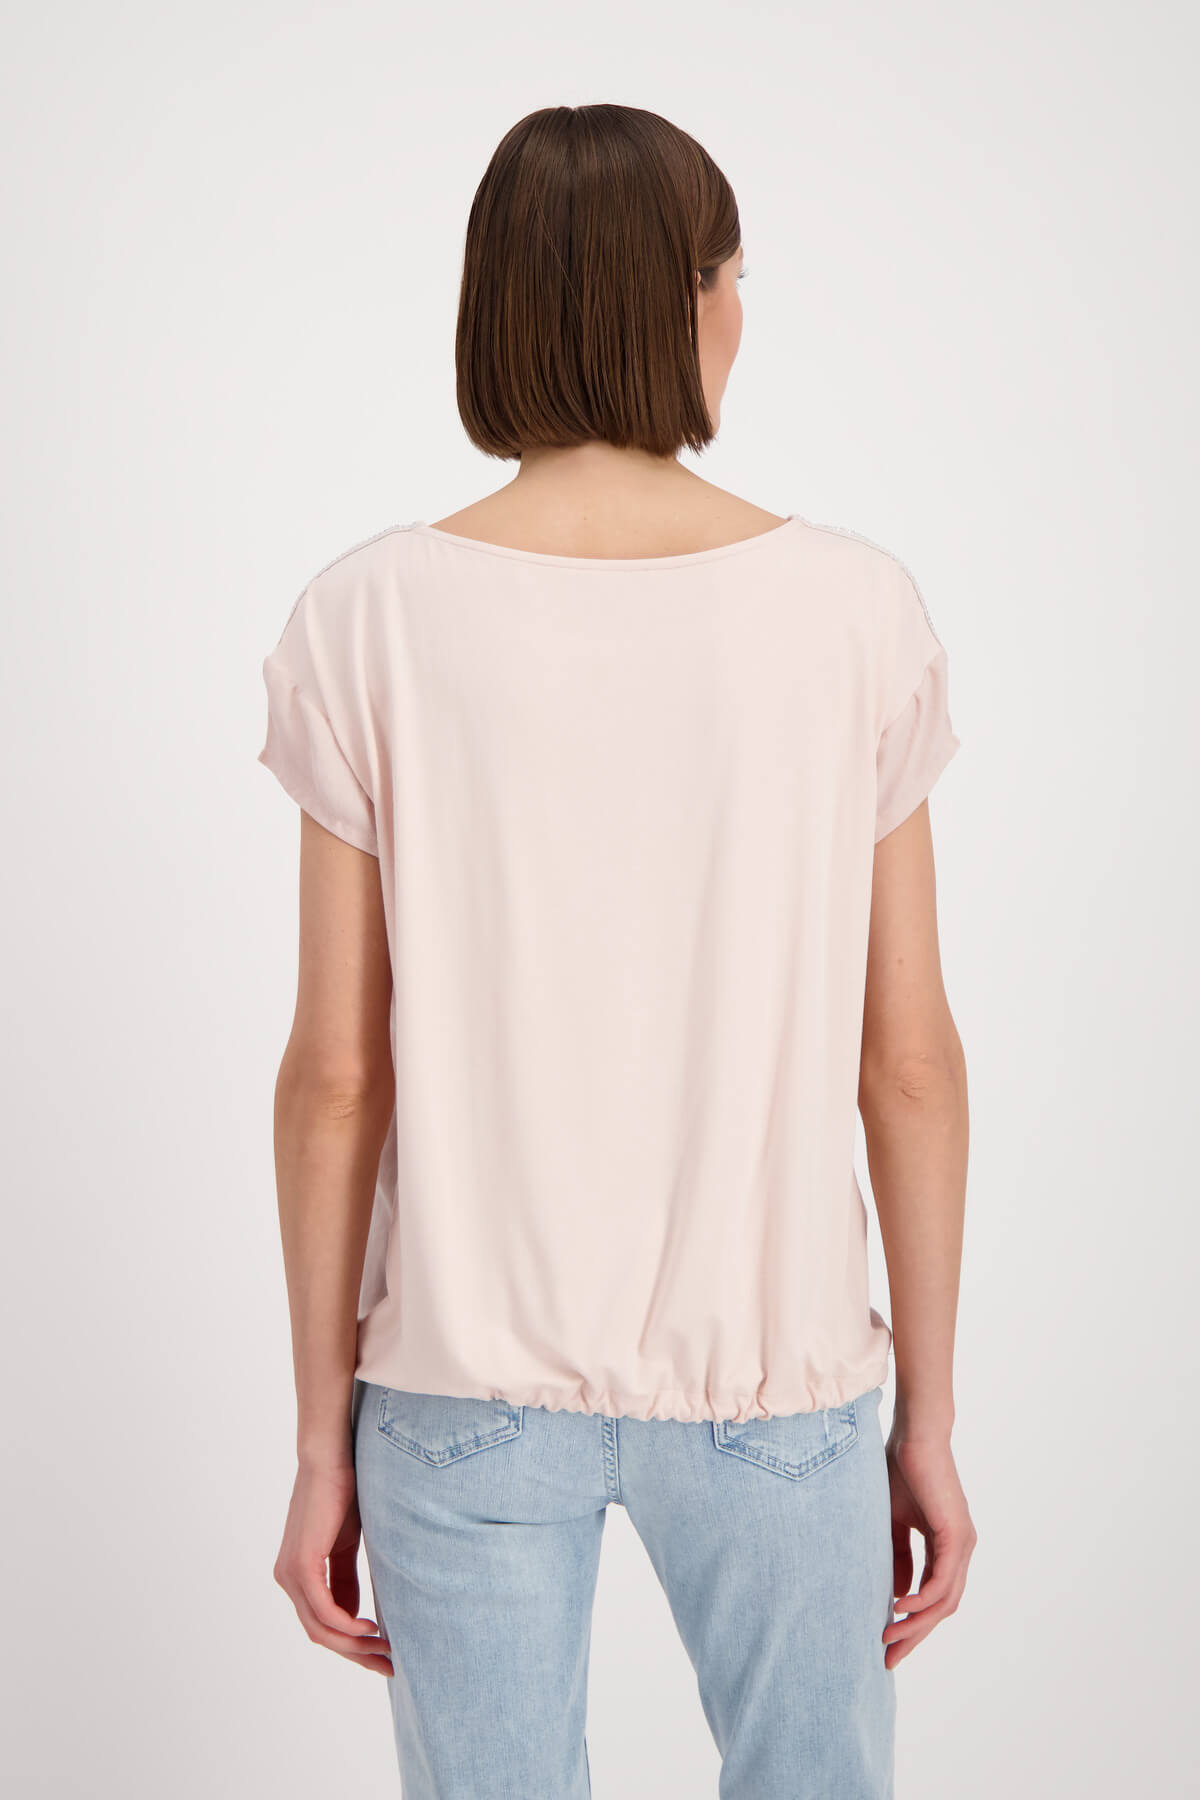 Jersey  Sports Tape Top- Rosey Pink